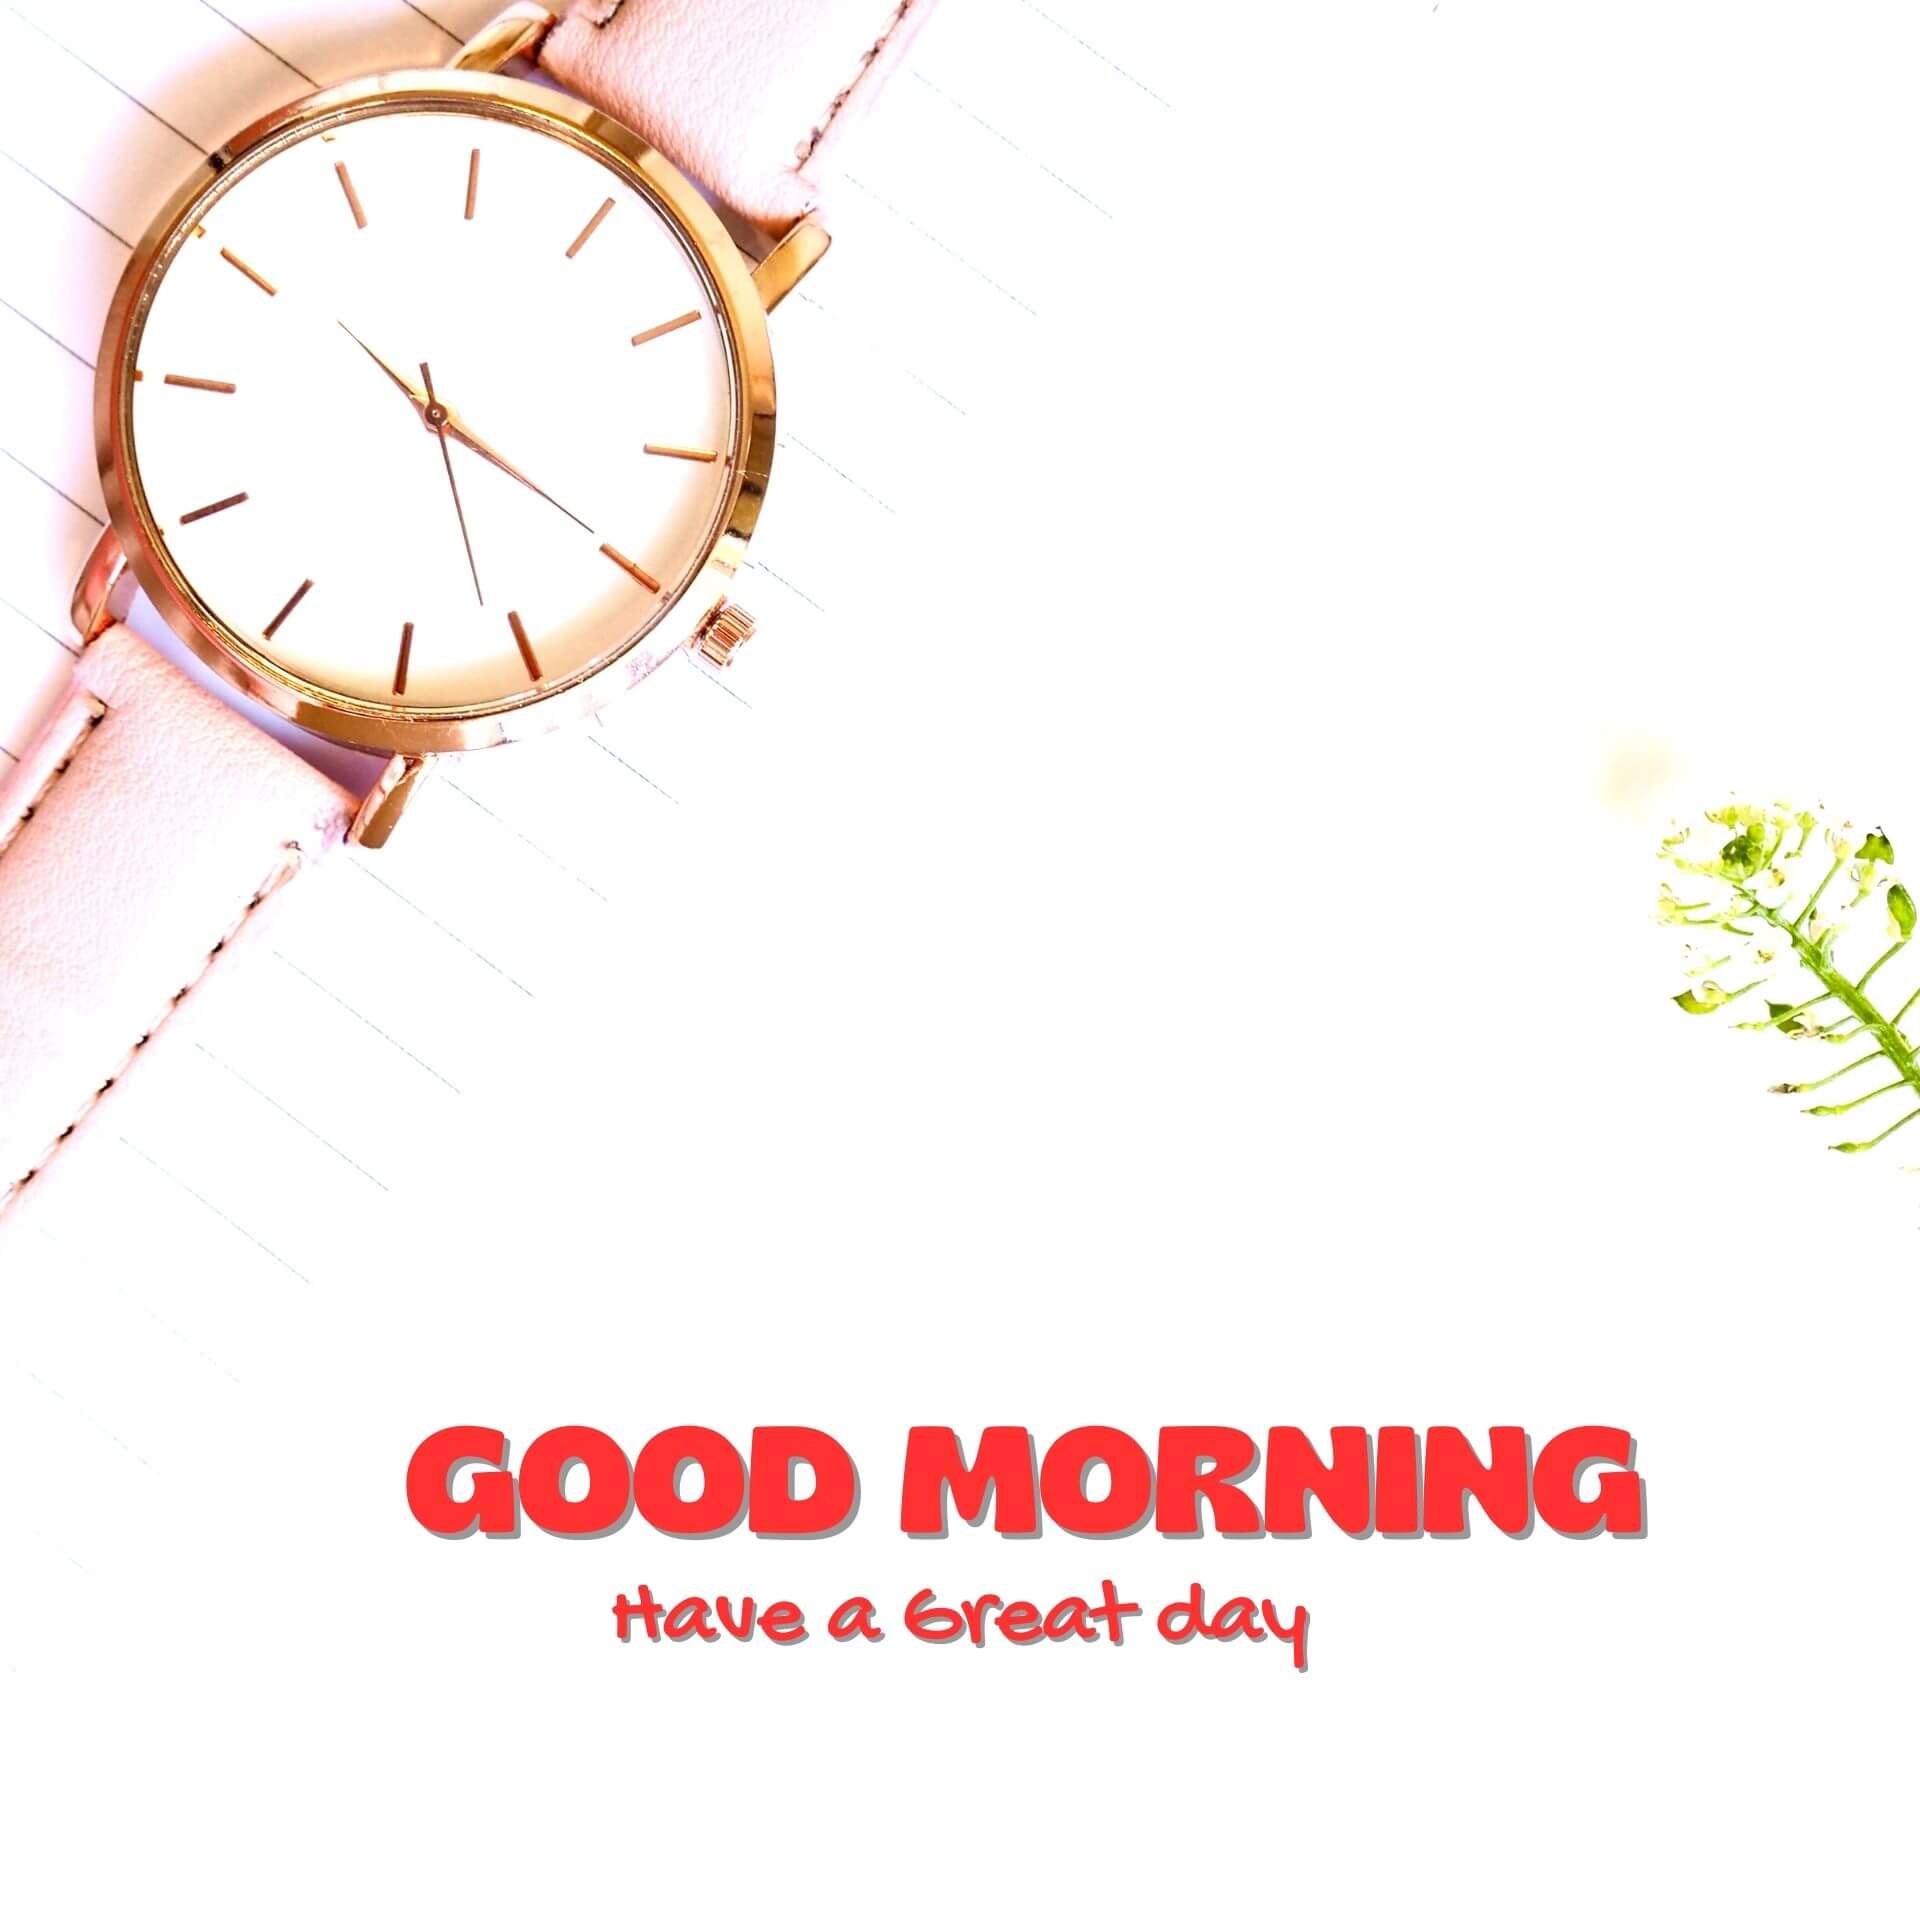 Good morning have a nice day Wallpaper Images HD Download